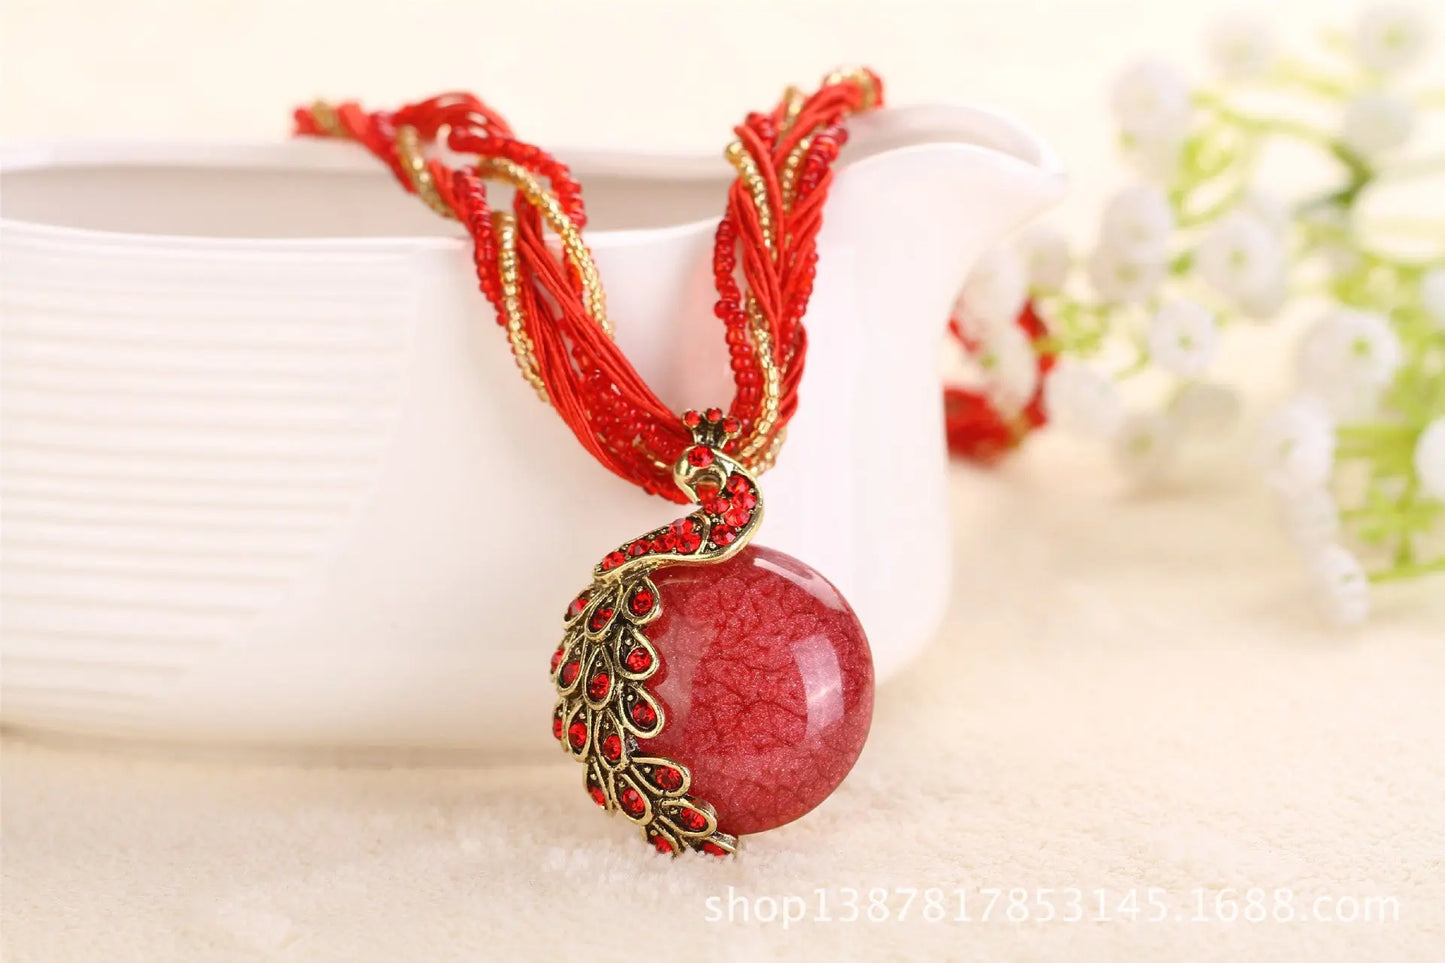 Boho Ethnic Jewelry Choker Handmade Pendant Necklace Natural Stone Bead Peacock Statement Maxi Necklace for Women Girls Gifts - Trending's Arena Beauty Boho Ethnic Jewelry Choker Handmade Pendant Necklace Natural Stone Bead Peacock Statement Maxi Necklace for Women Girls Gifts Electronics Facial & Neck red